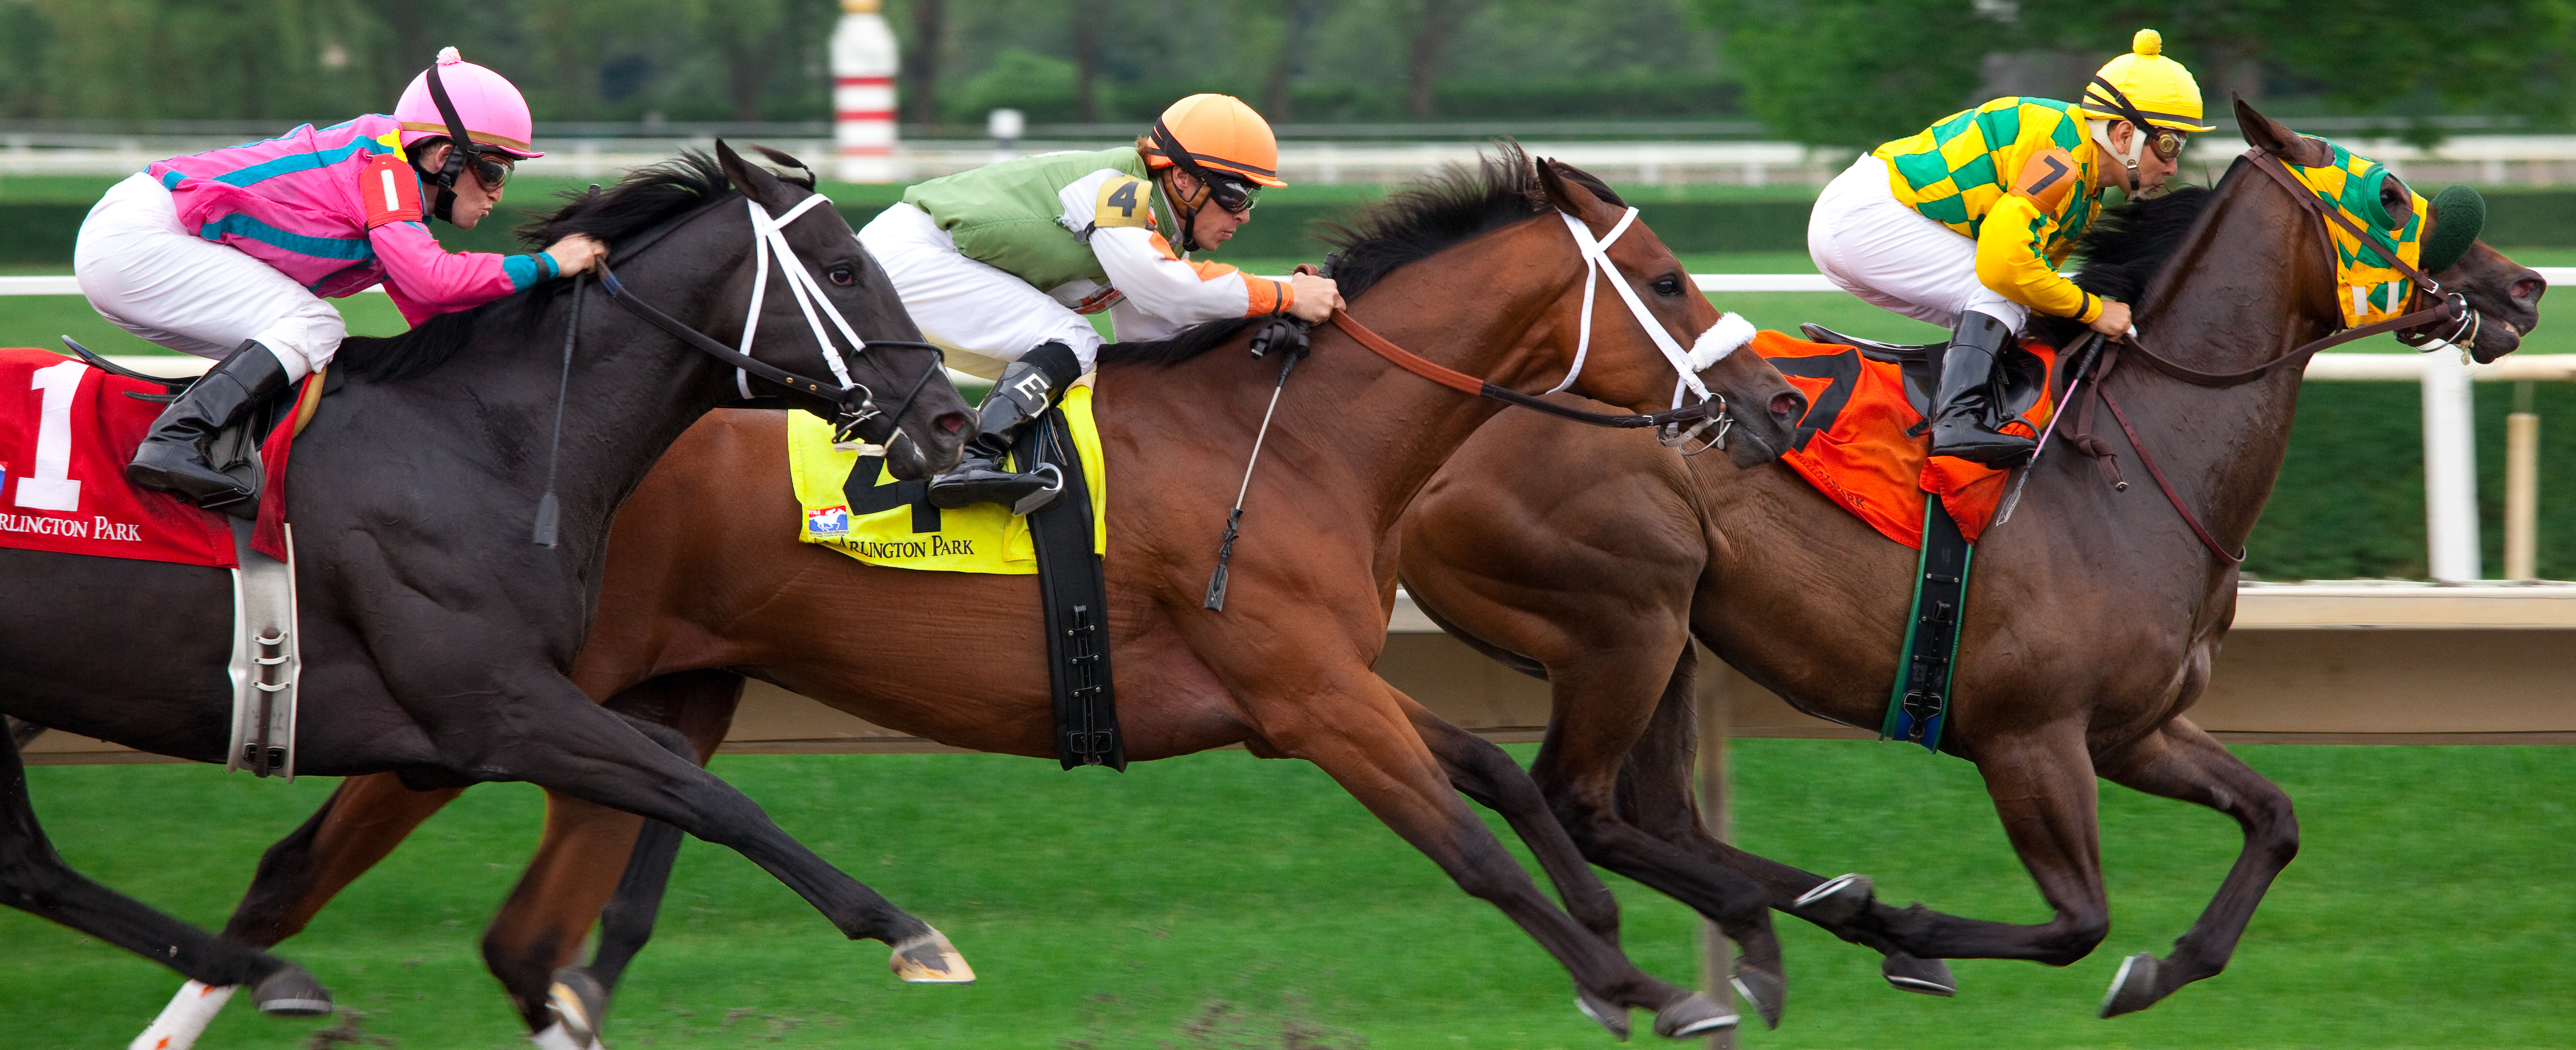 Evaluation of the 2009 Kentucky Derby